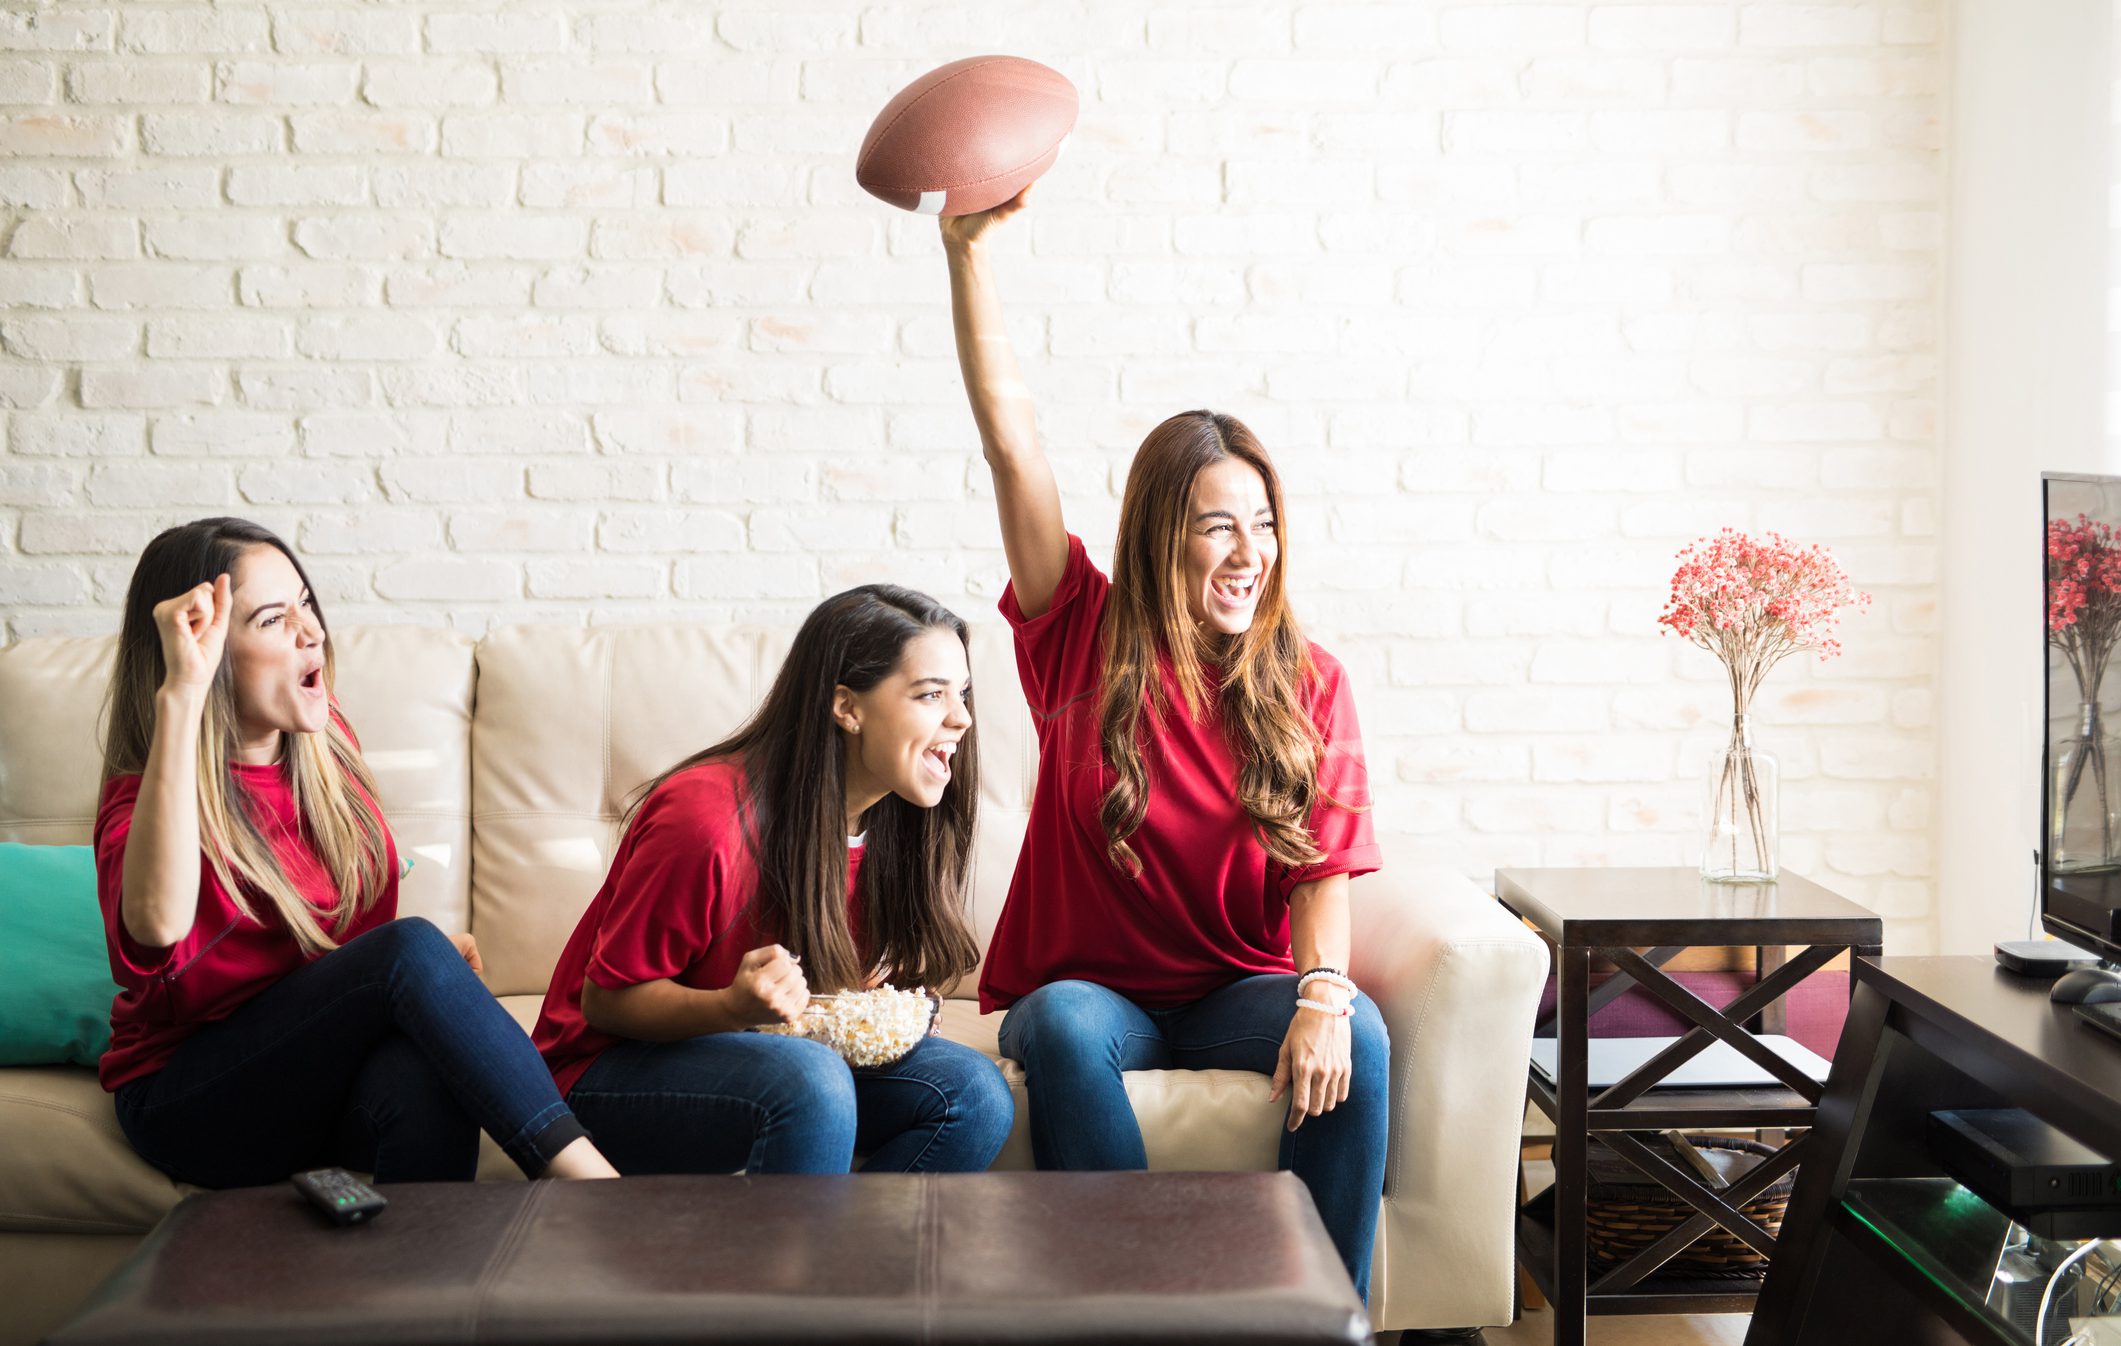 Three roomies wearing team jerseys and watching a football team on tv, celebrating a touchdown